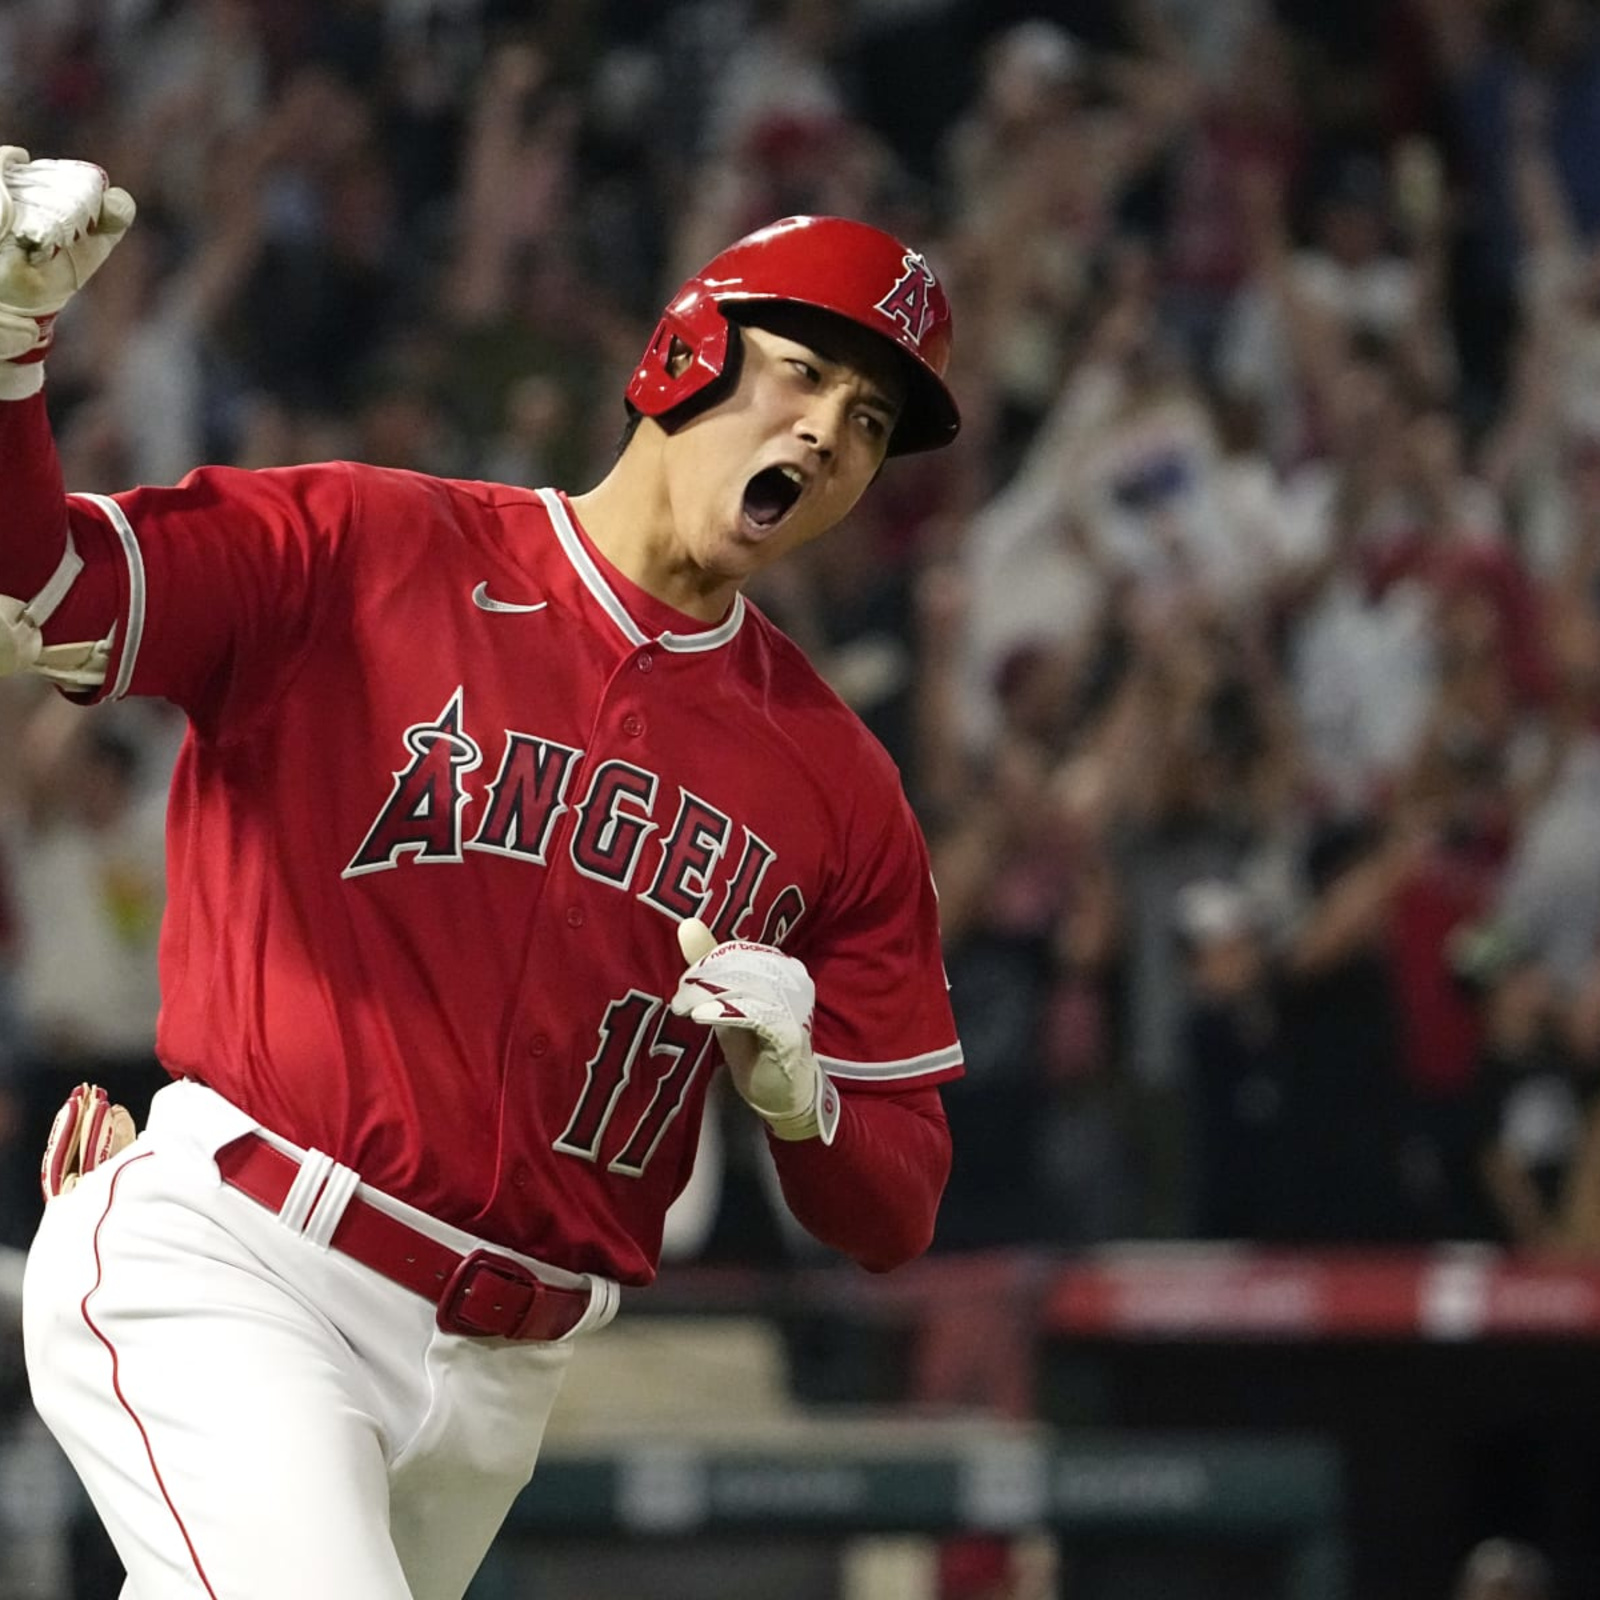 If the Blue Jays push for Shohei Ohtani, would the cost be worth